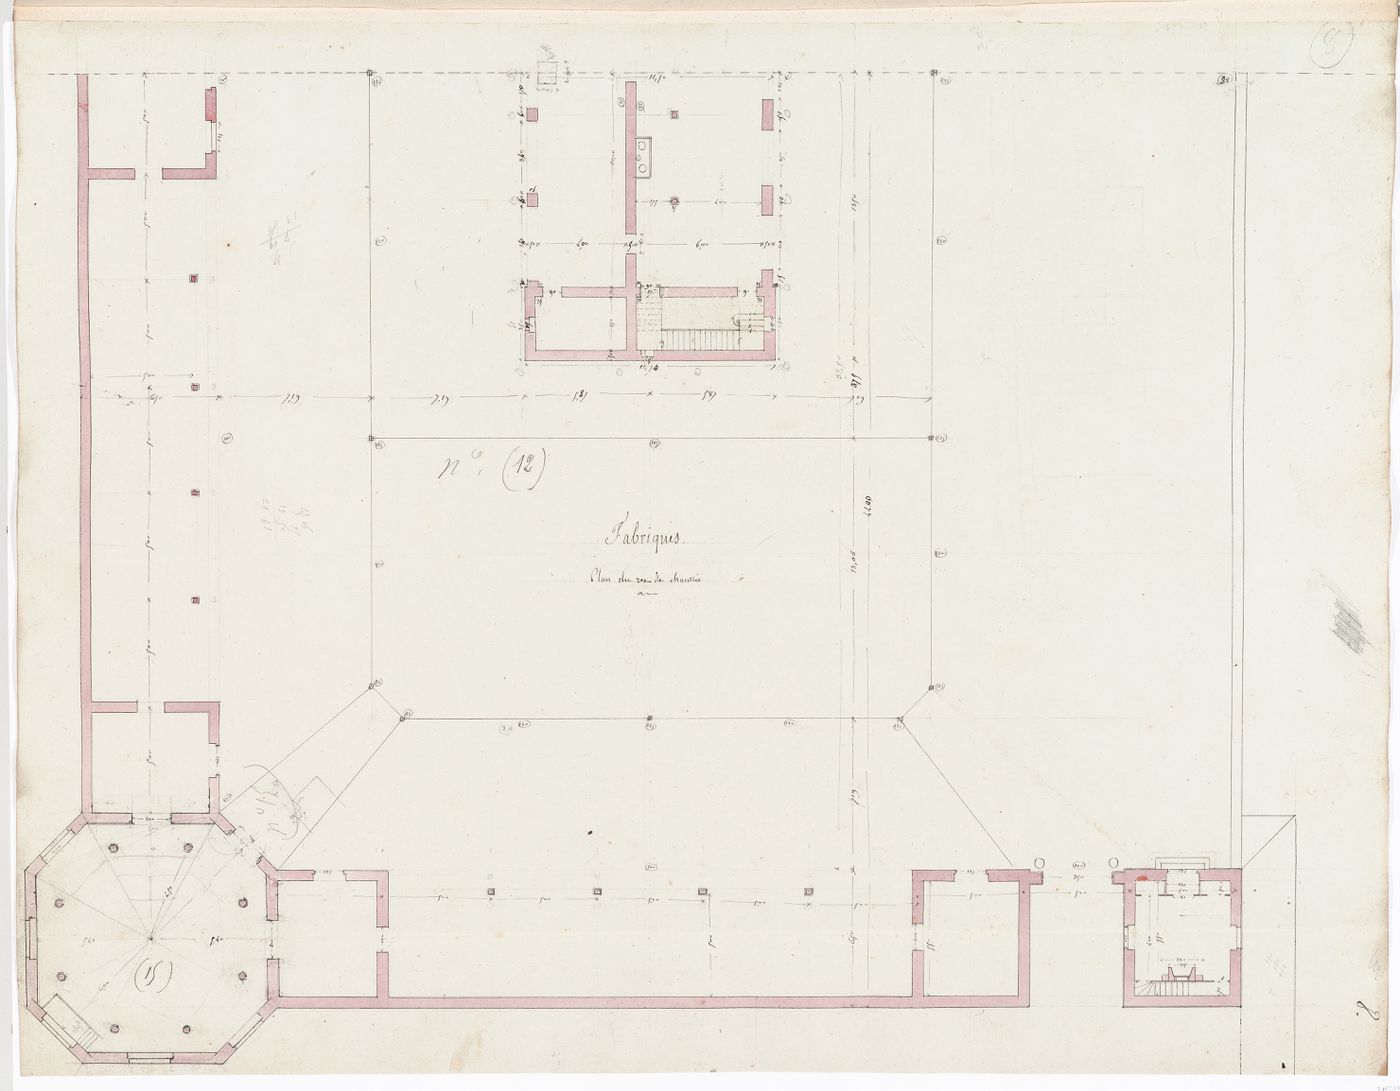 Project for Clos d'équarrissage, fôret de Bondy: Ground floor plan for the factory for the preservation of muscles